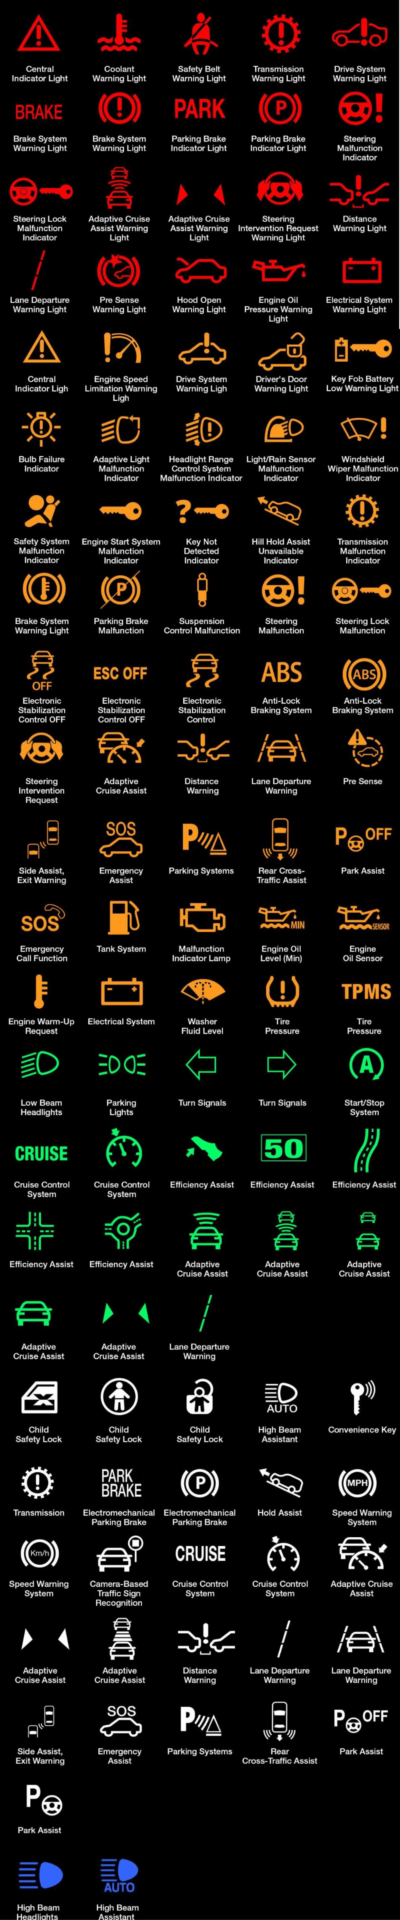 Dodge Ram dashboard symbols and meanings